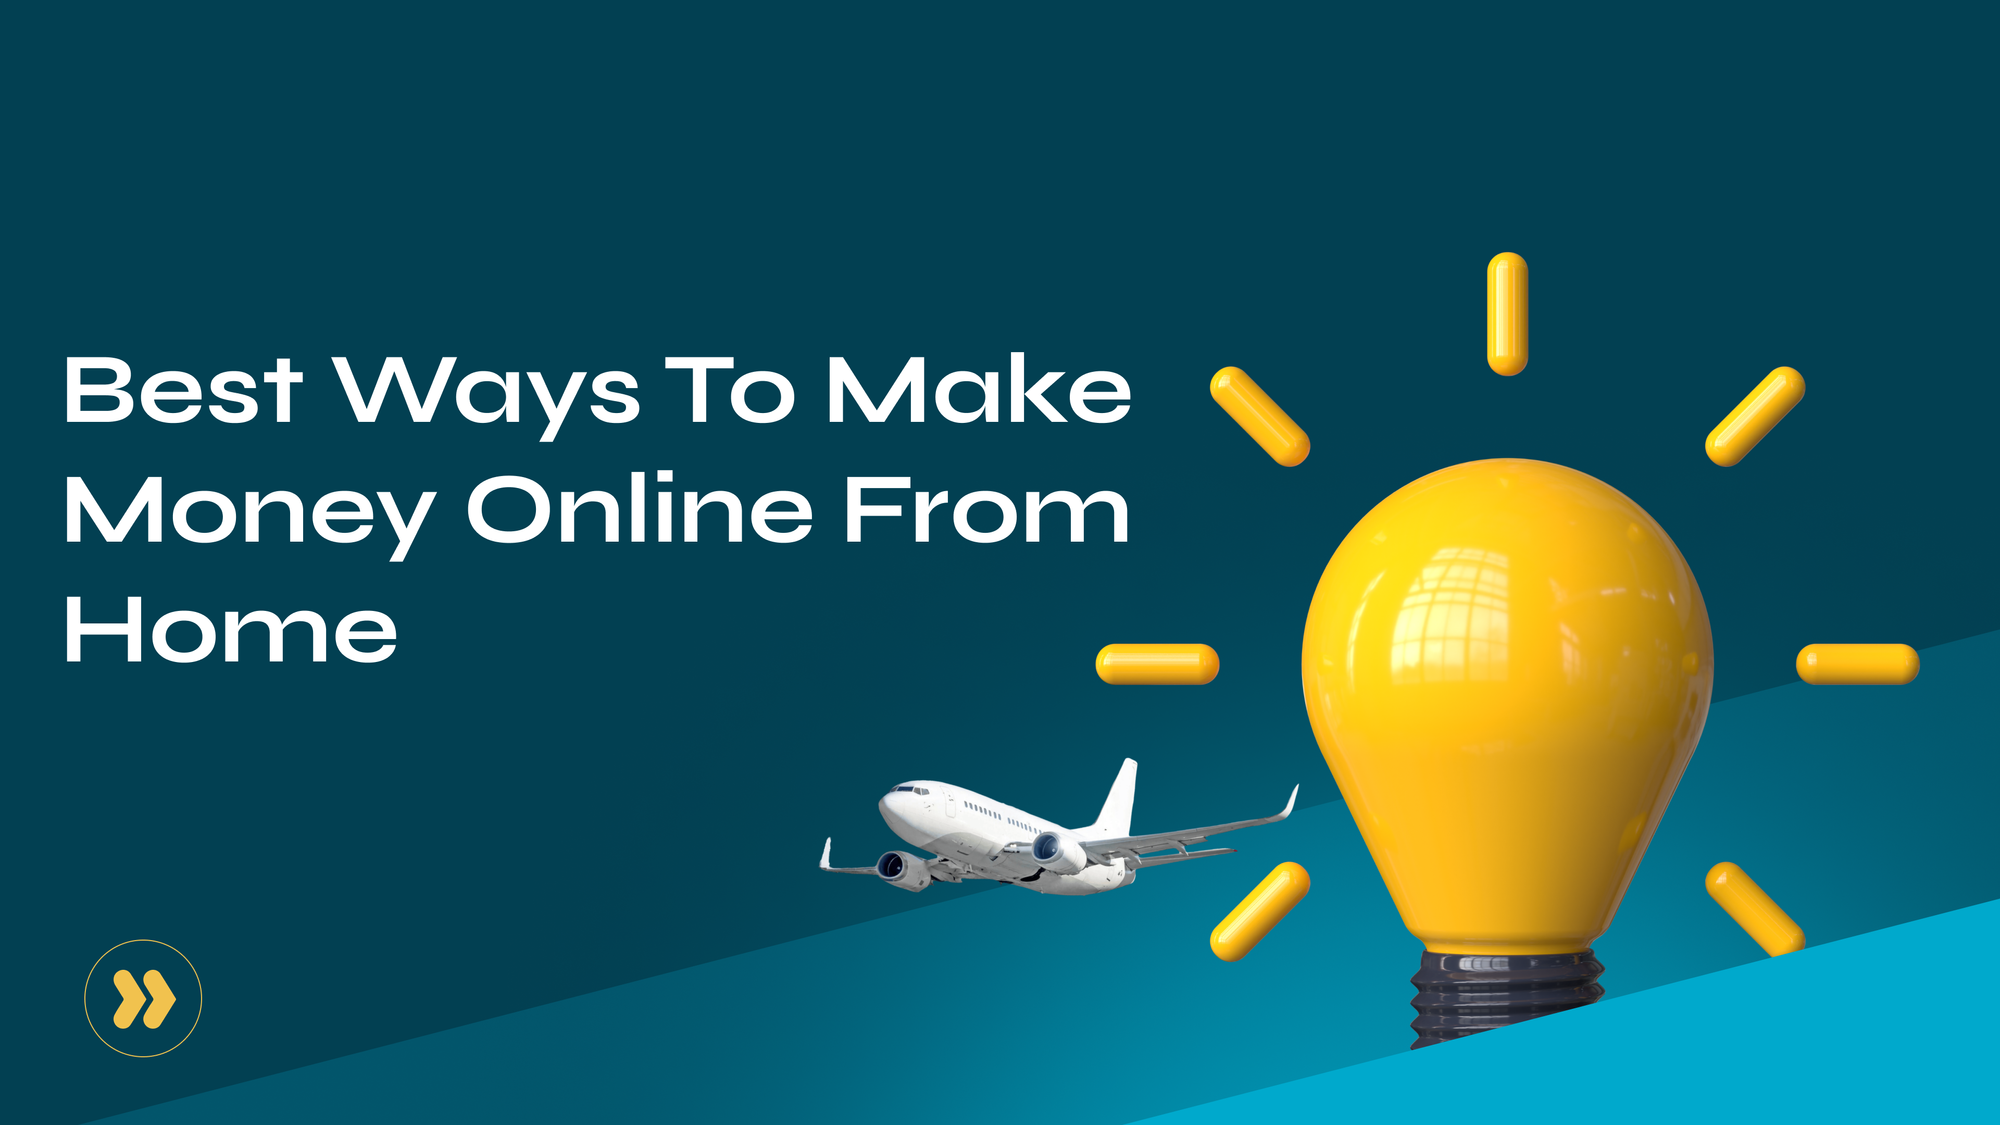 Top 7 Ways To Make Money Online From Home